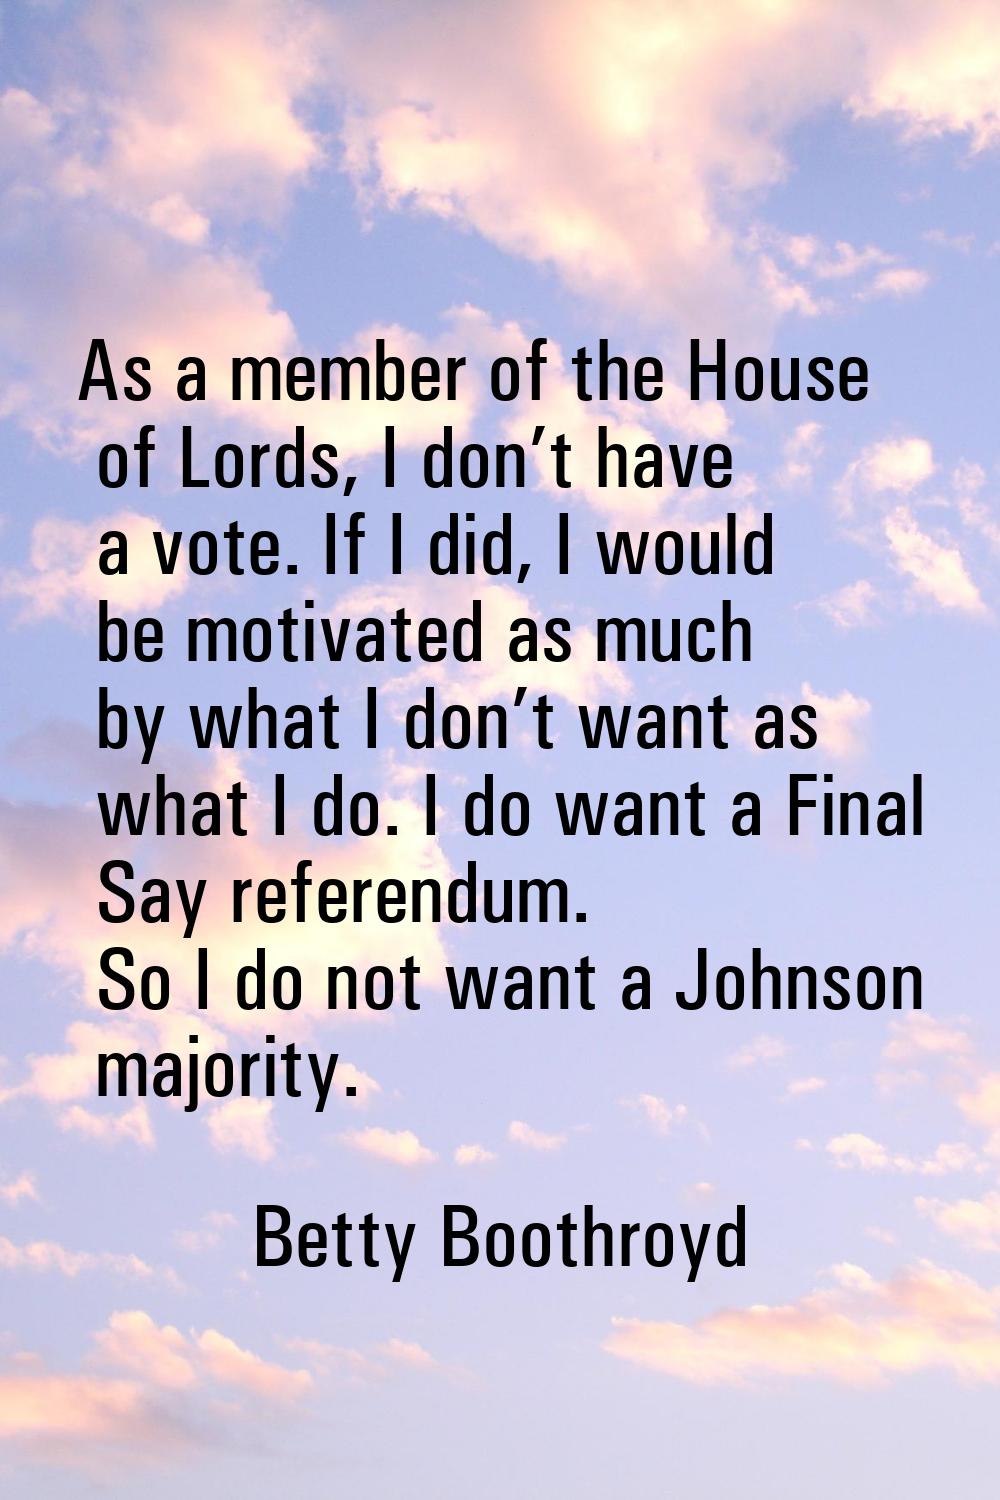 As a member of the House of Lords, I don’t have a vote. If I did, I would be motivated as much by w